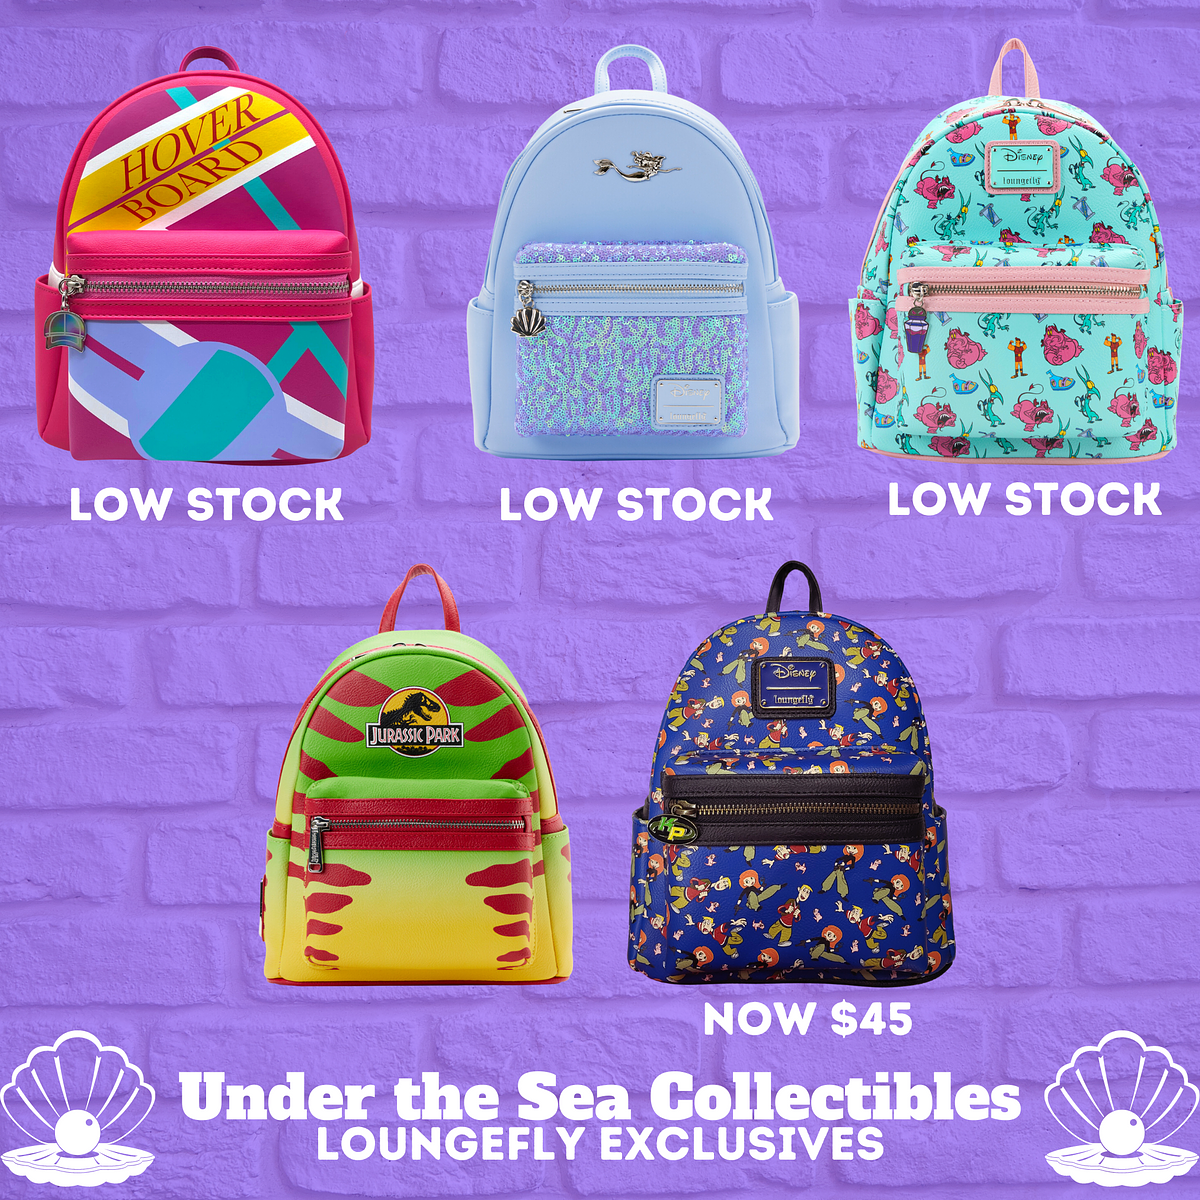 Loungefly Exclusive Now Only $45! - Under The Sea Collectibles